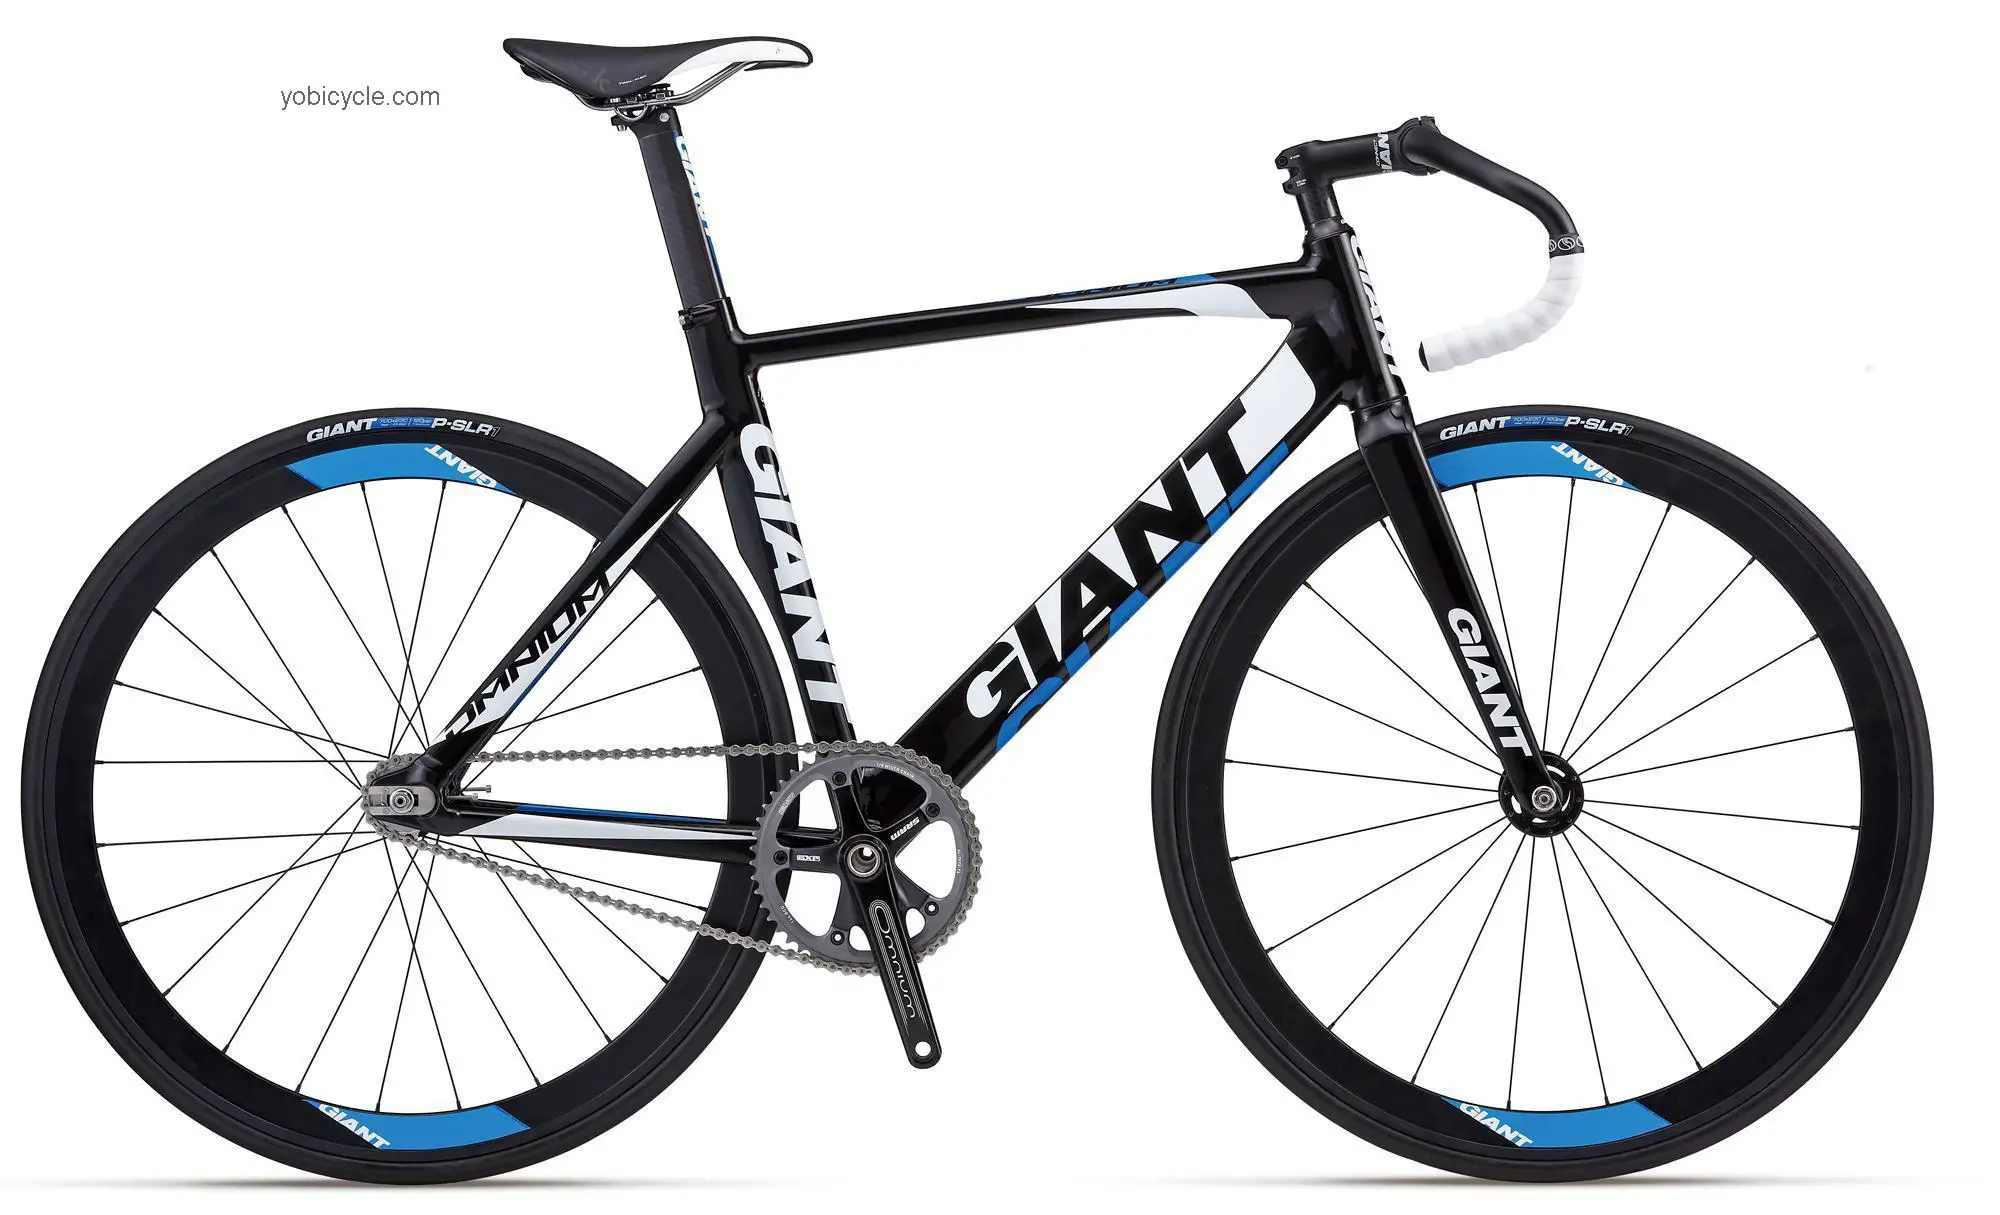 Giant Omnium competitors and comparison tool online specs and performance